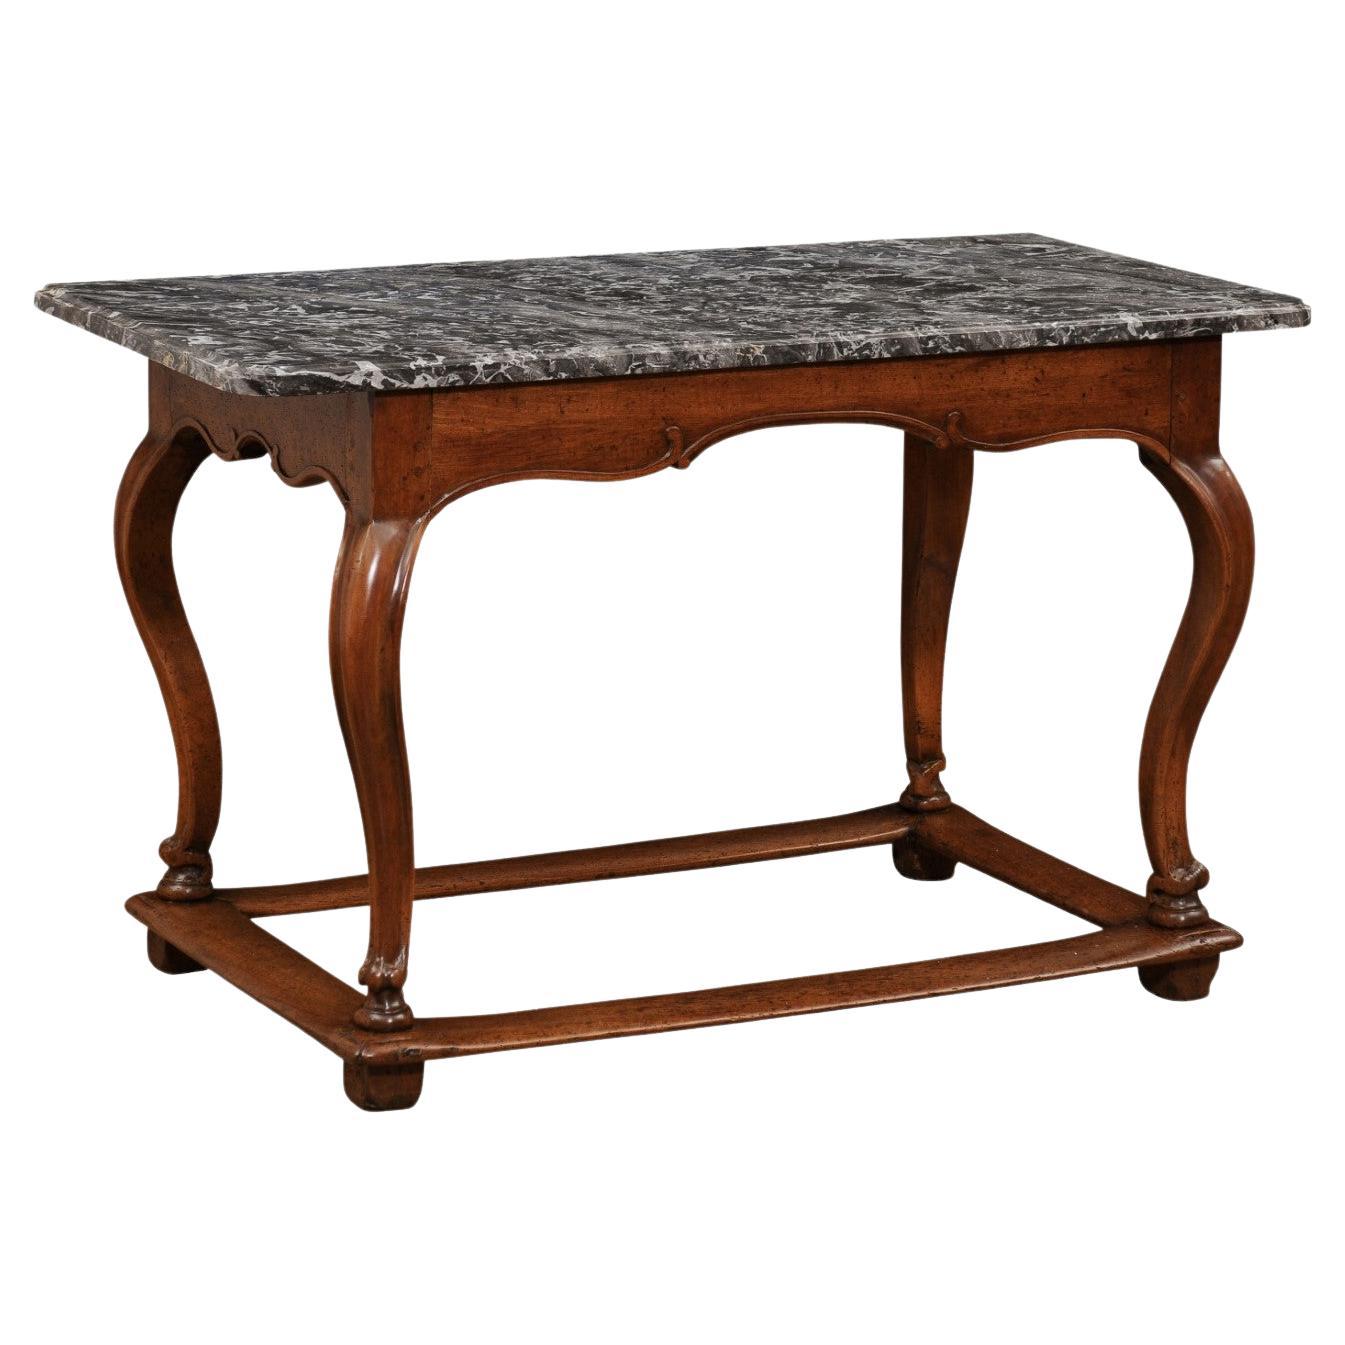 French 18th Century Louis XV Walnut Center Table with Variegated Grey Marble Top